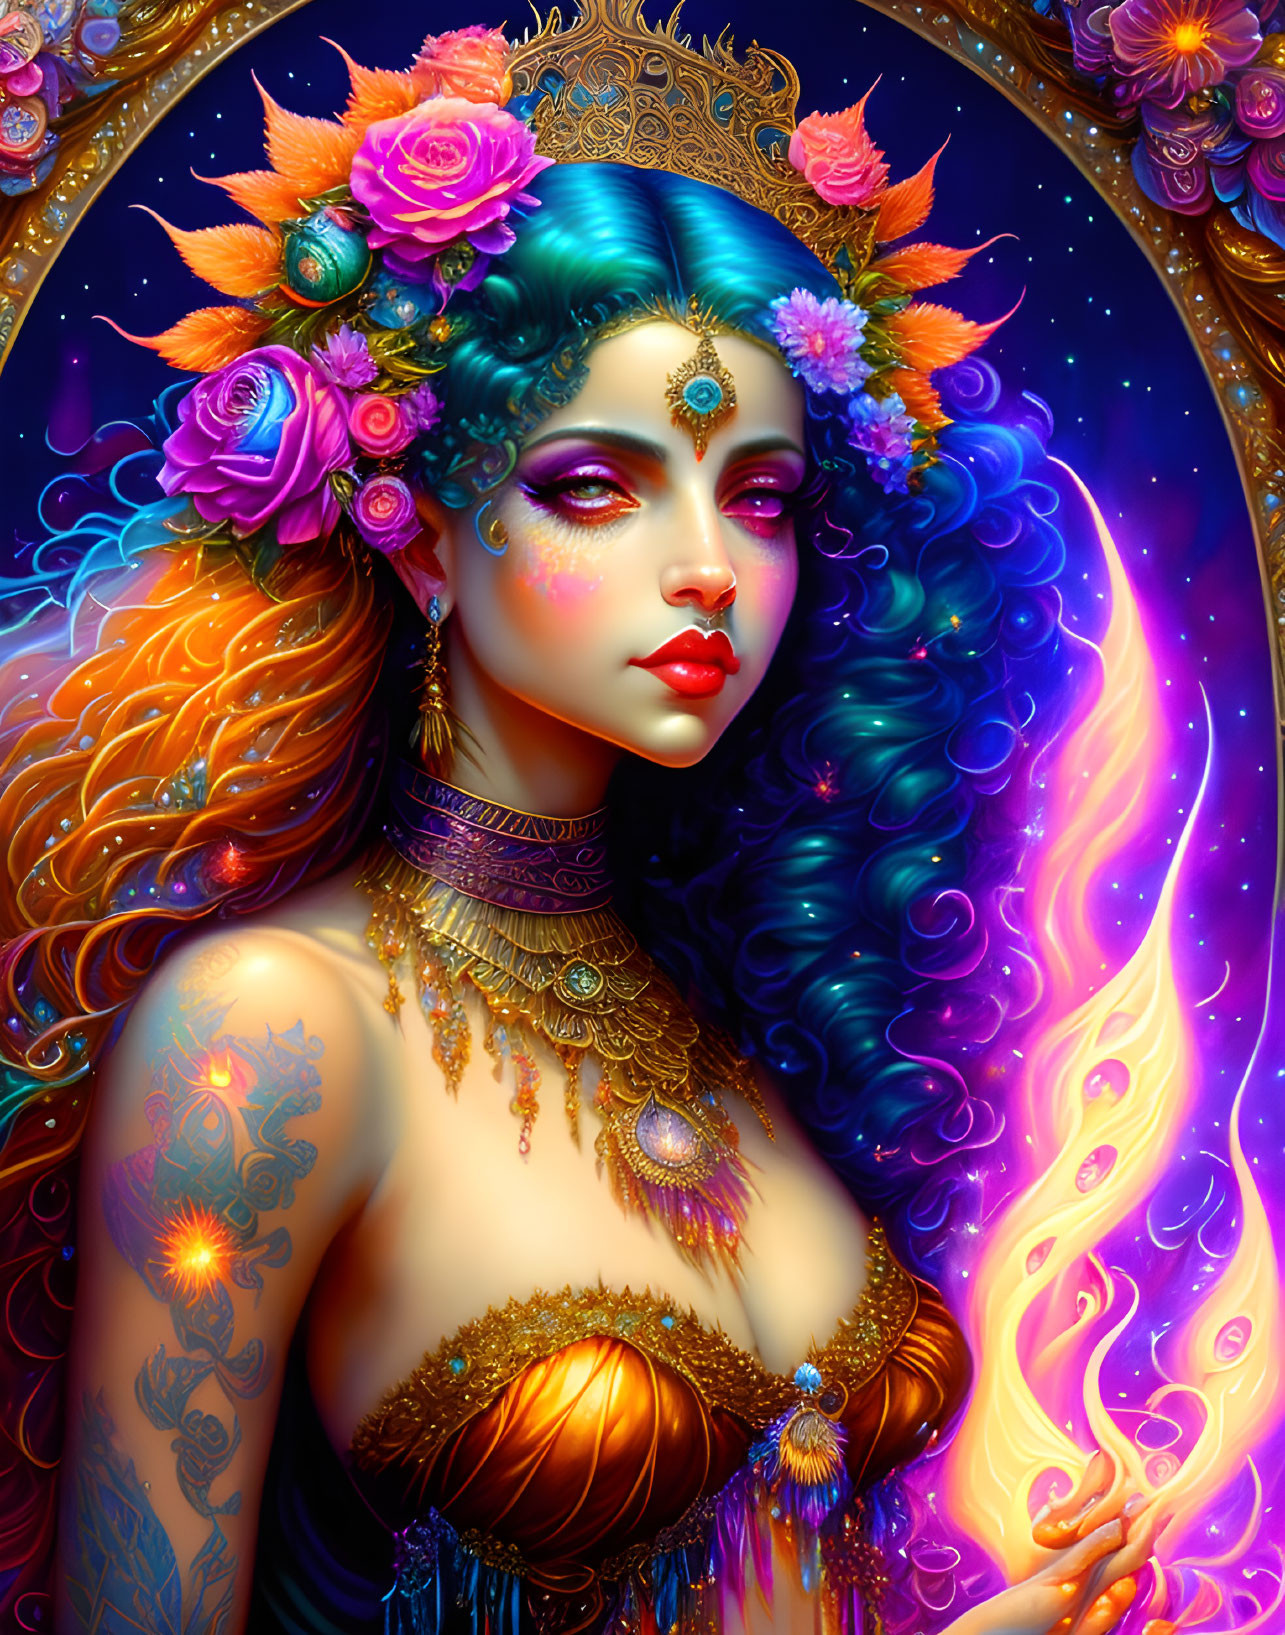 Colorful Hair and Golden Jewelry on Mystical Woman in Cosmic Setting